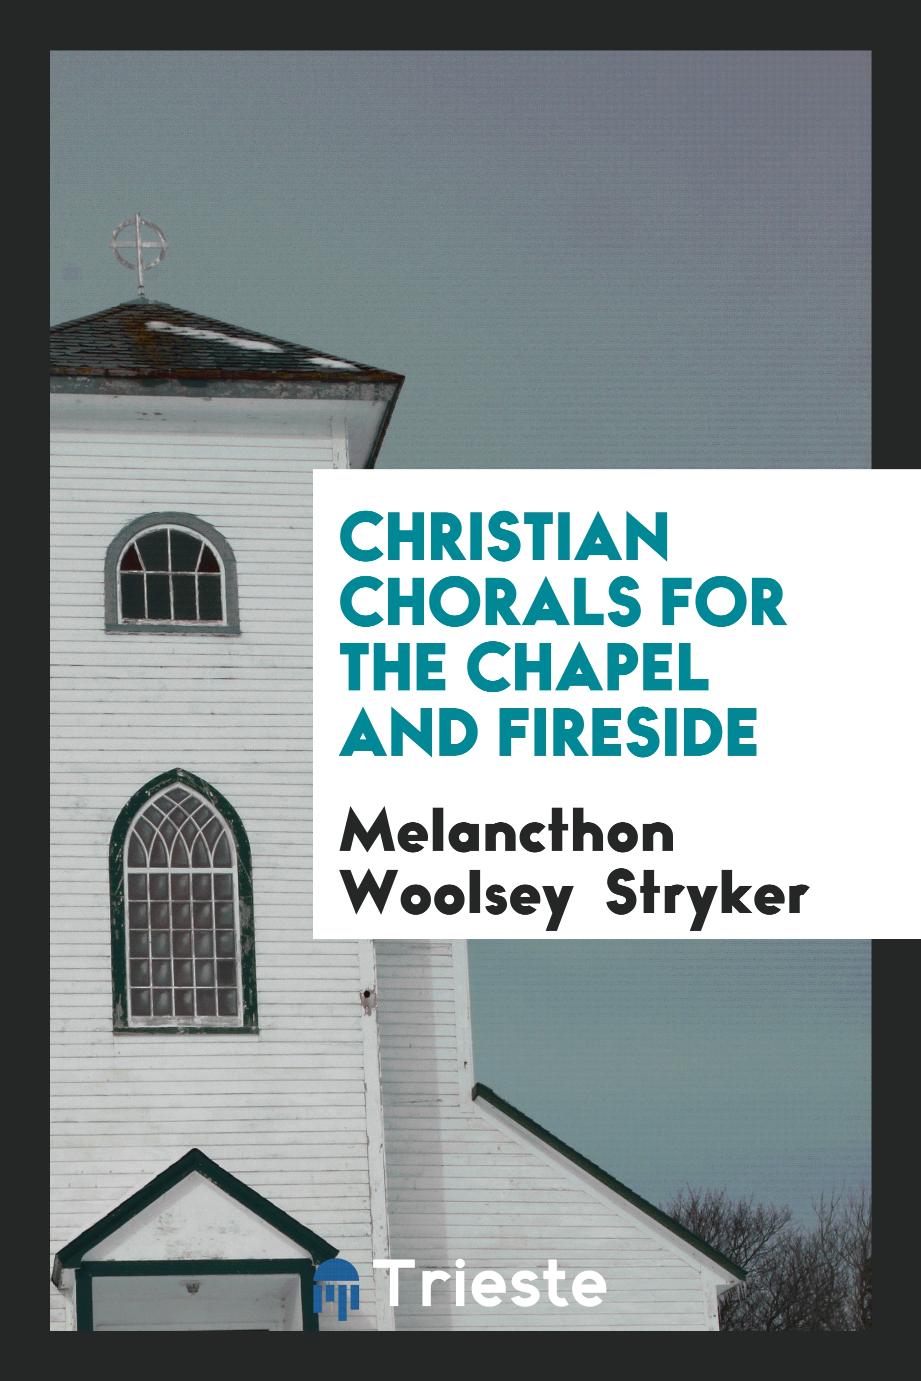 Christian Chorals for the Chapel and Fireside